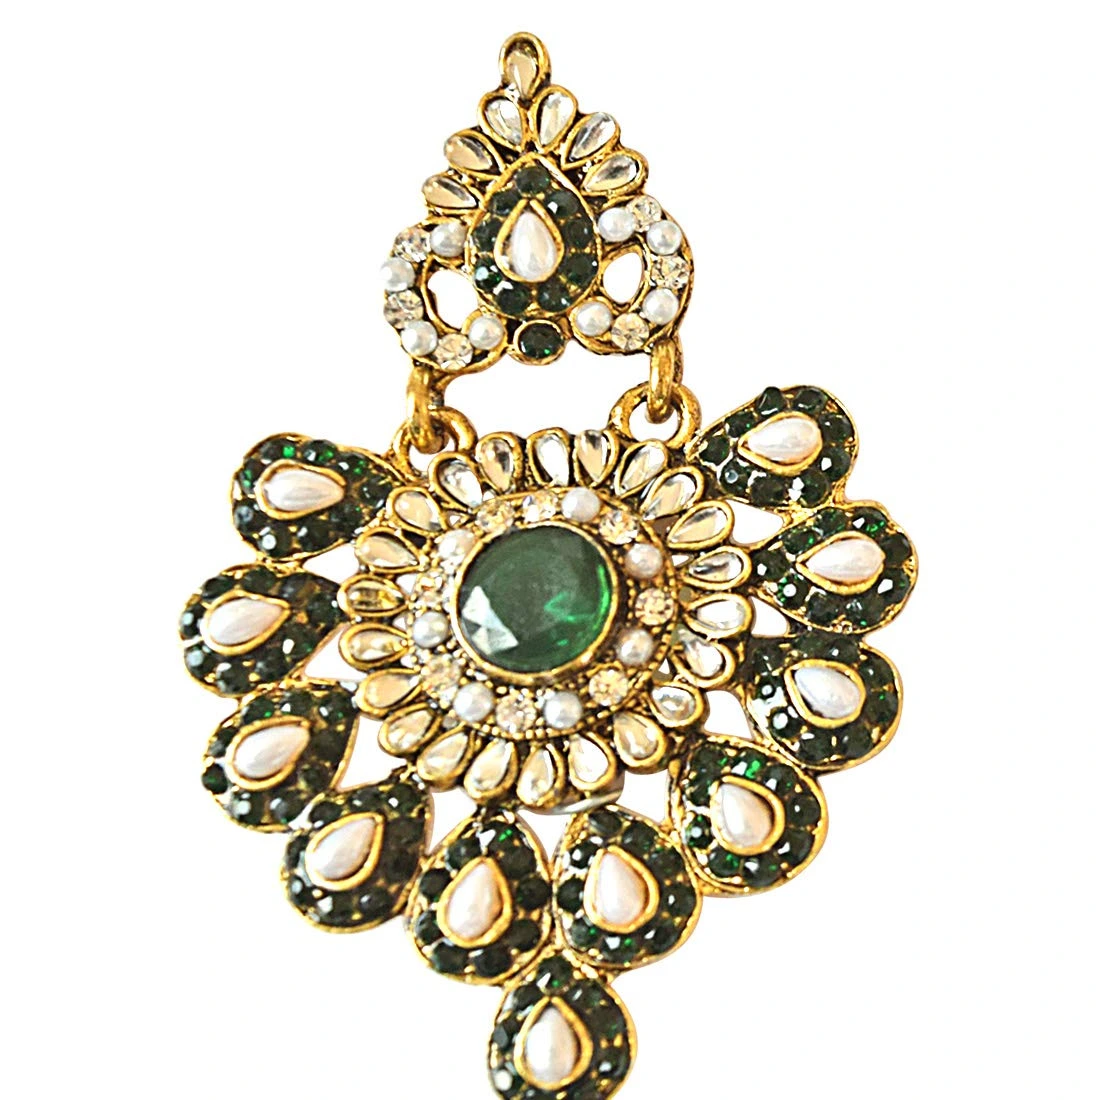 Floral Designed Green & White Stones, Shell Pearl & Gold Plated Chand Bali Earrings (PSE19)